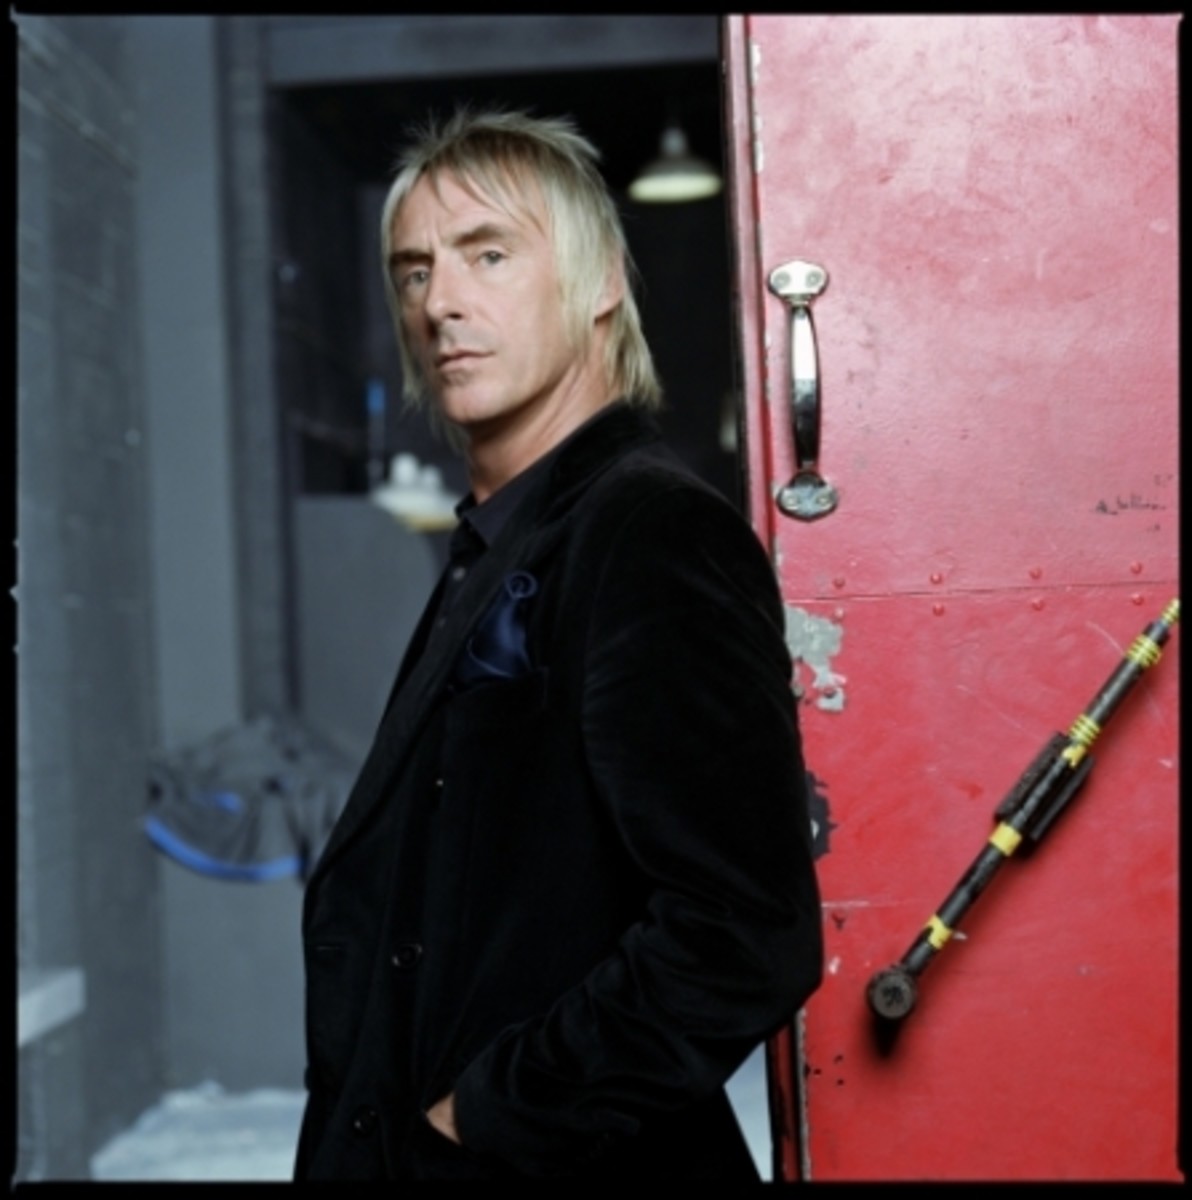  Paul Weller and his excellent backing band performed an outstanding show on the second of two nights at the Best Buy Theater in New York City’s Times Square on Saturday, May 19th.